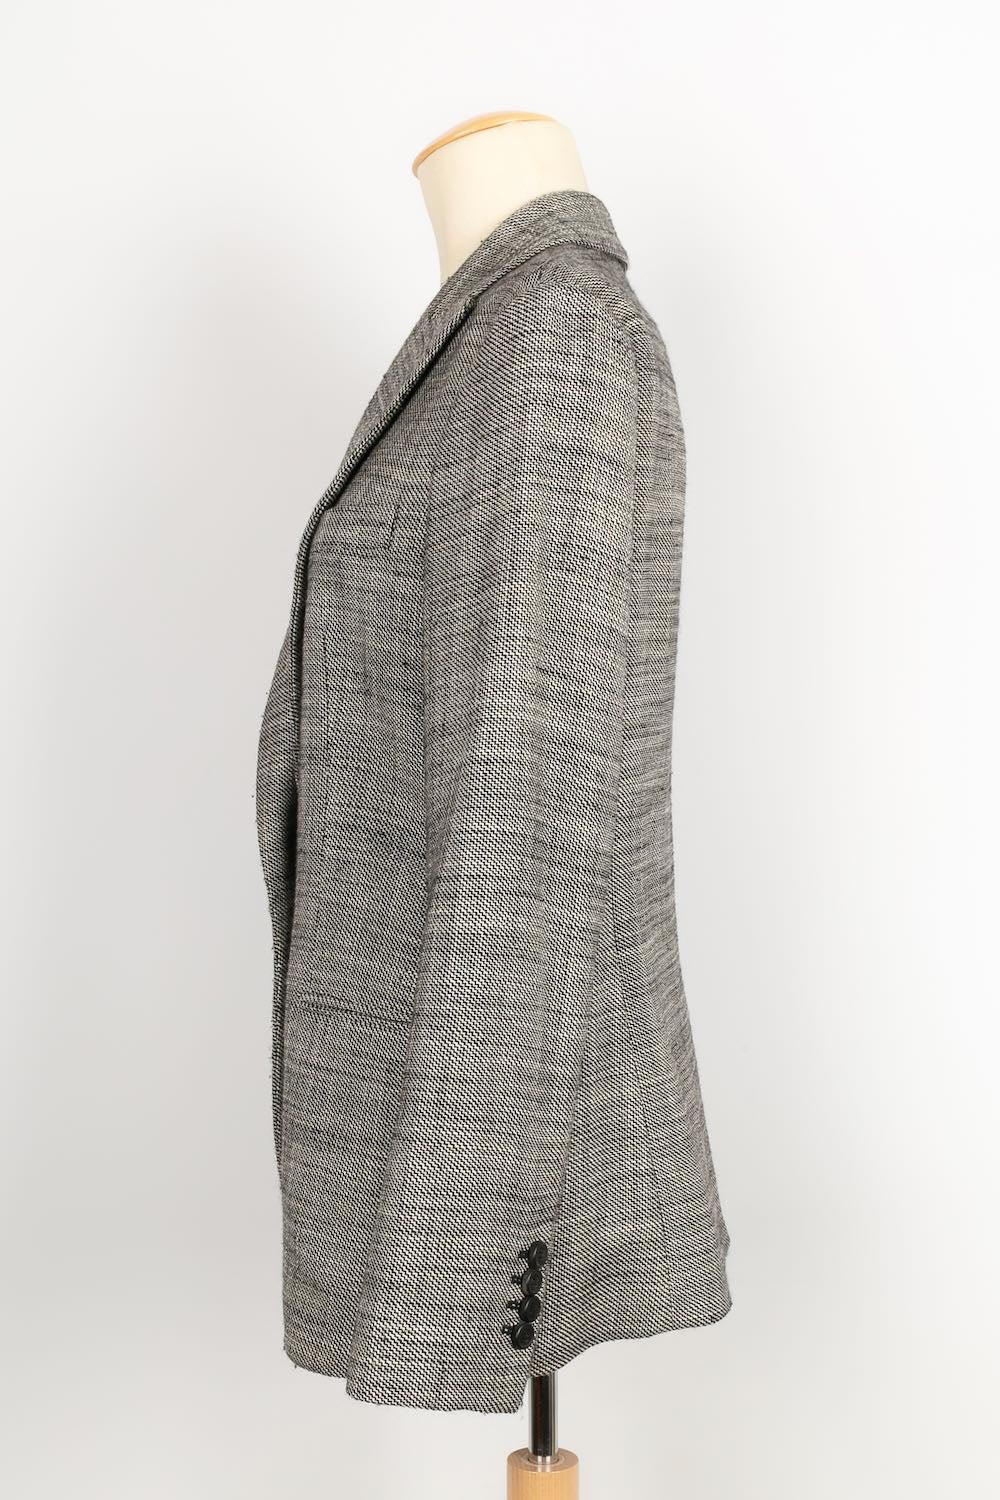 Dior - (Made in Italy) Grey wool and silk jacket. Size 40FR.

Additional information:
Condition: Very good condition
Dimensions: Shoulder width: 41 cm - Chest: 48 cm - Sleeve length: 61 cm - Length: 68 cm

Seller Reference: FV63